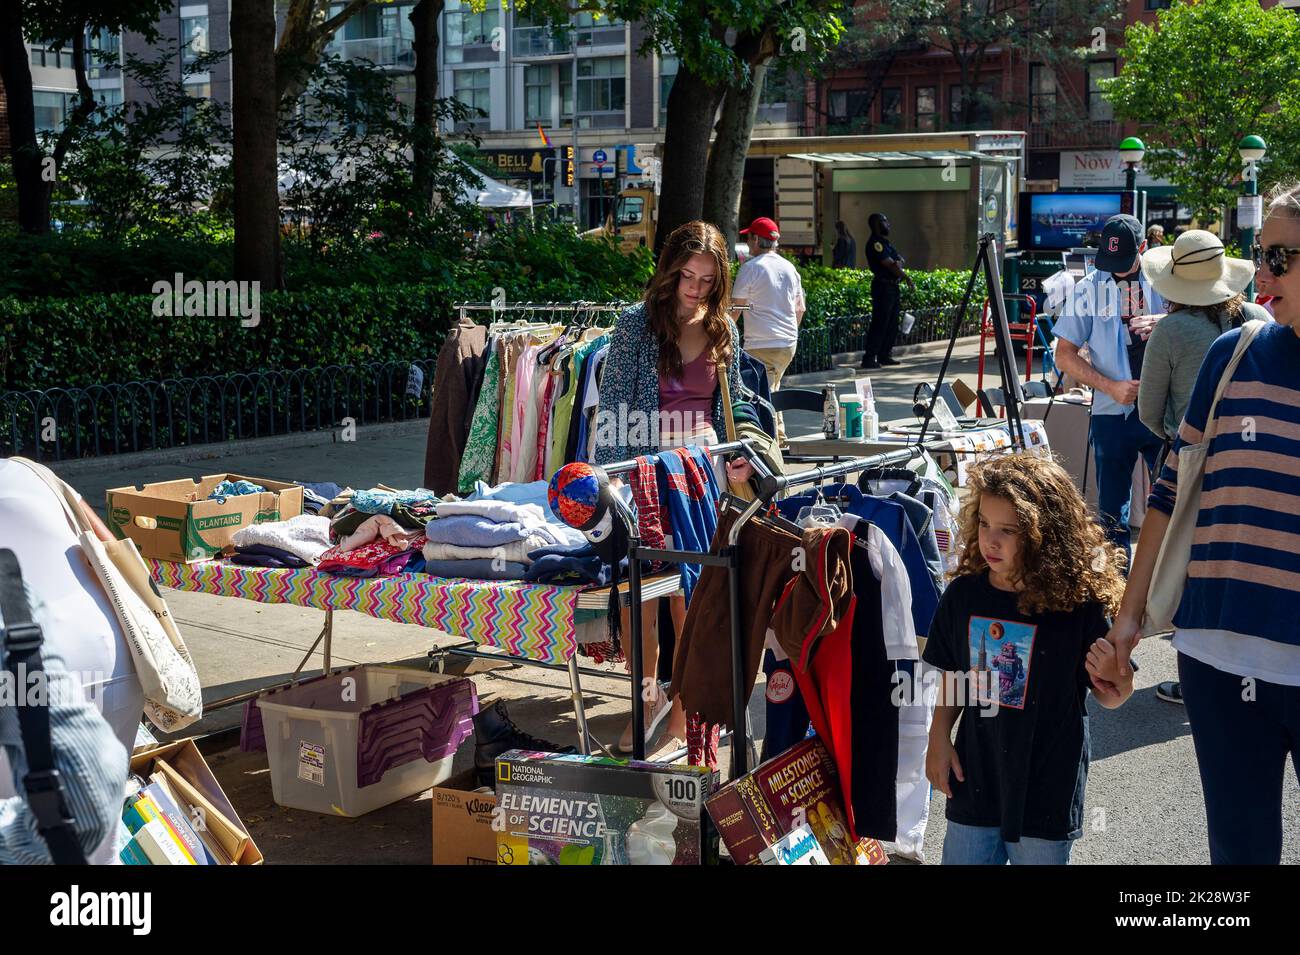 Shoppers search for bargains at the humongous annual Penn South Flea Market in the New York neighborhood of Chelsea on Saturday, September 17, 2022. The flea market appears like Brigadoon, only once every year, and the residents of the 20 building Penn South cooperative have a closet cleaning extravaganza. Shoppers from around the city come to the flea market which attracts thousands passing through.  (© Richard B. Levine) Stock Photo